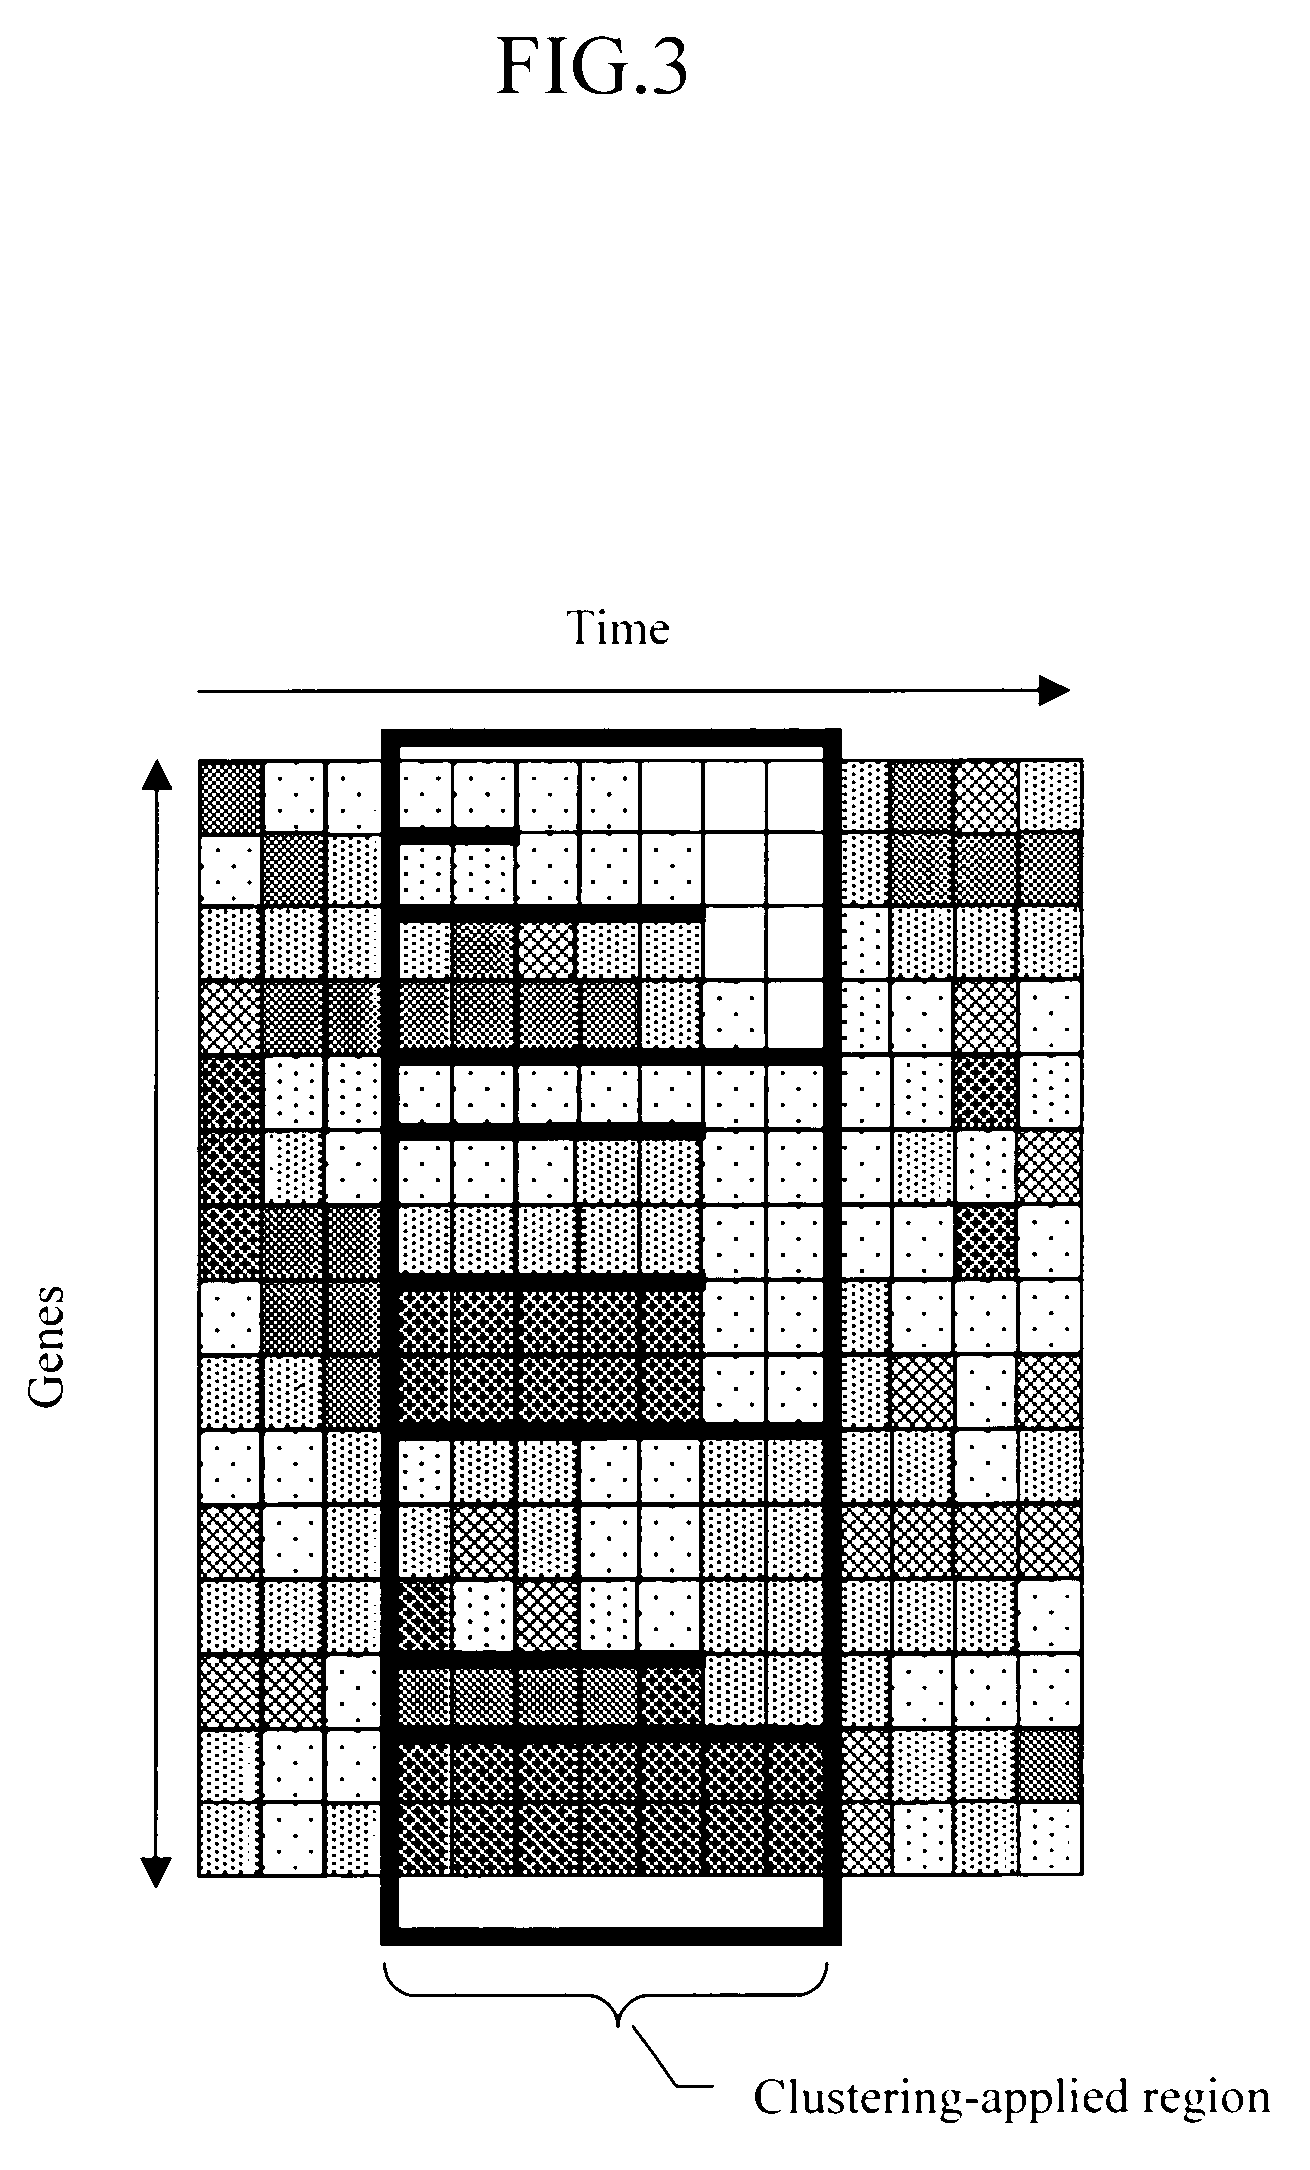 Method and apparatus for displaying gene expression patterns